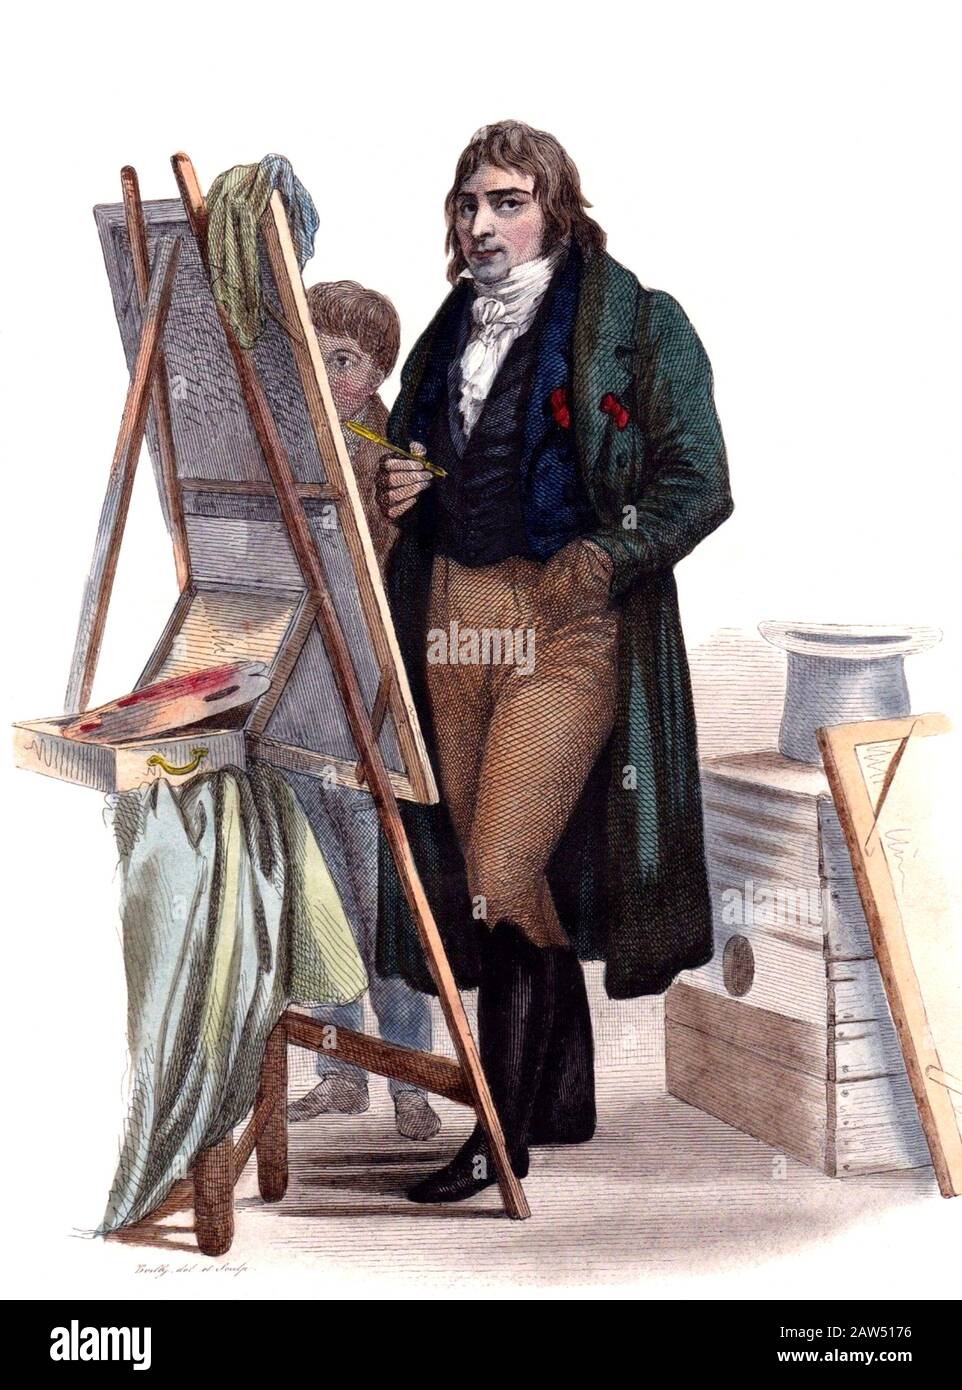 1810 ca , Paris , FRANCE : The french painter ANTOINE JEAN GROS baron GROS  ( 1771 – 1835 ). His work was in the genres of history and Neoclassical pai  Stock Photo - Alamy